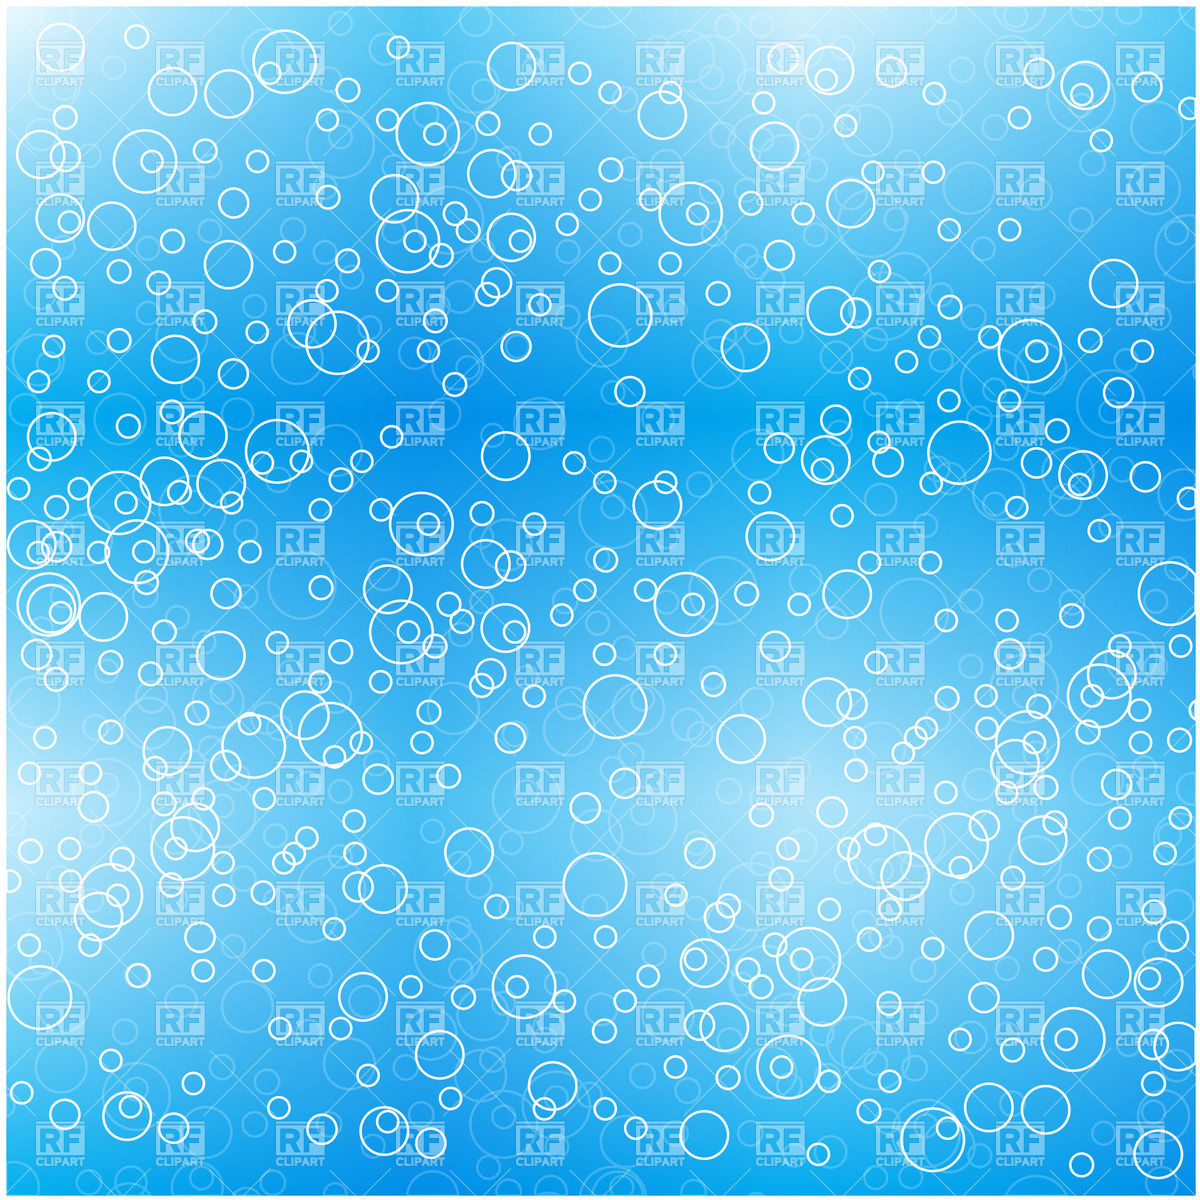 Water Background With Bubbles Download Royalty Free Vector Clipart